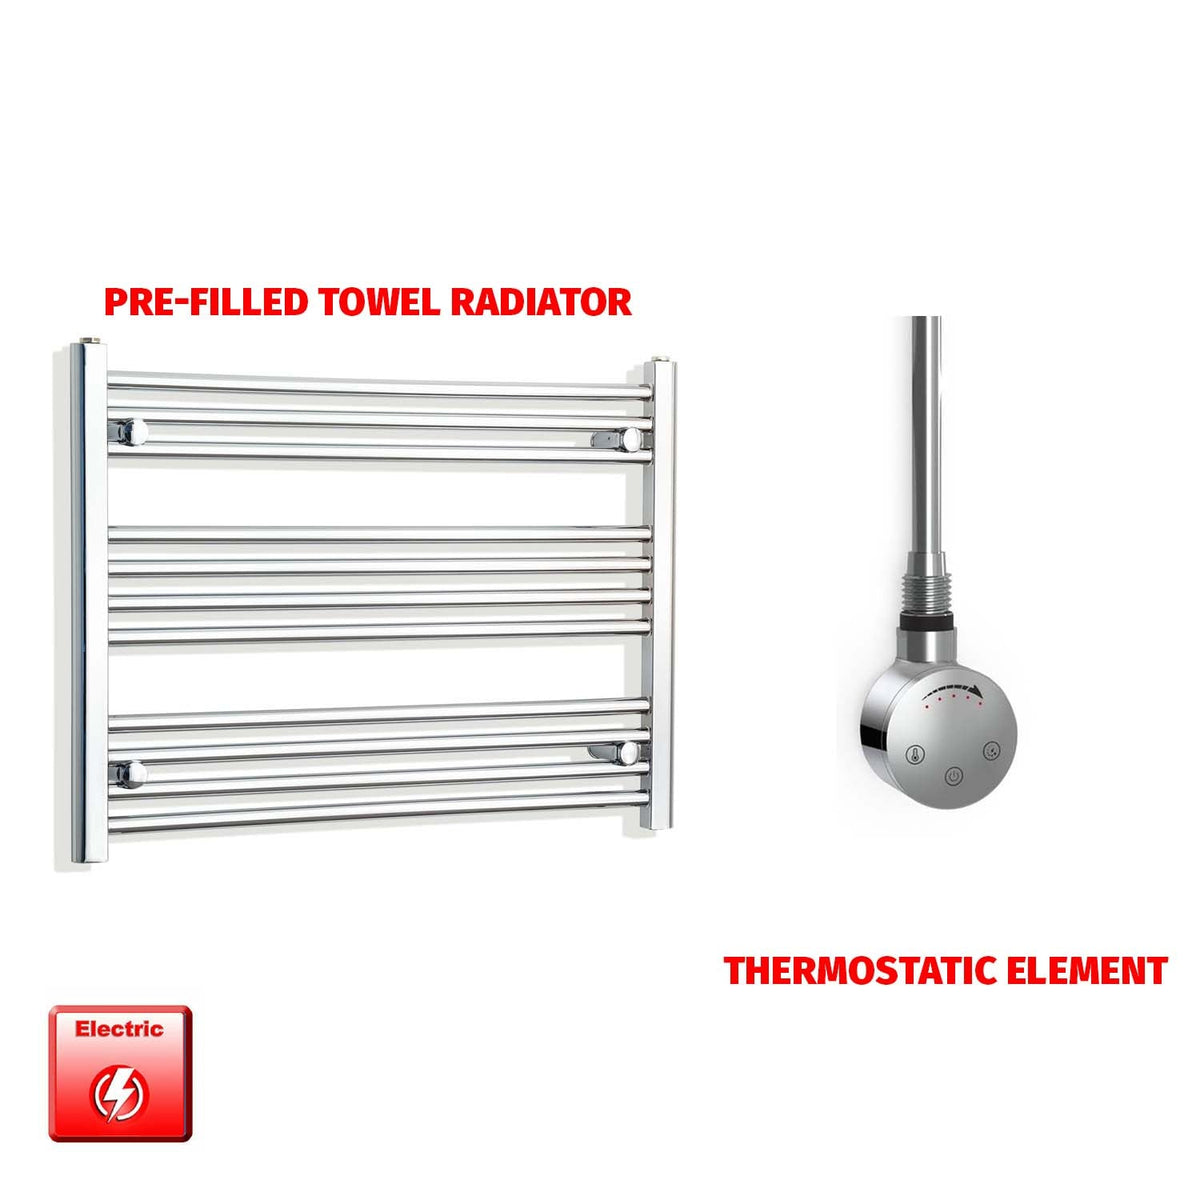 600mm High 850mm Wide Pre-Filled Electric Heated Towel Radiator Straight Chrome SMR Thermostatic element no timer